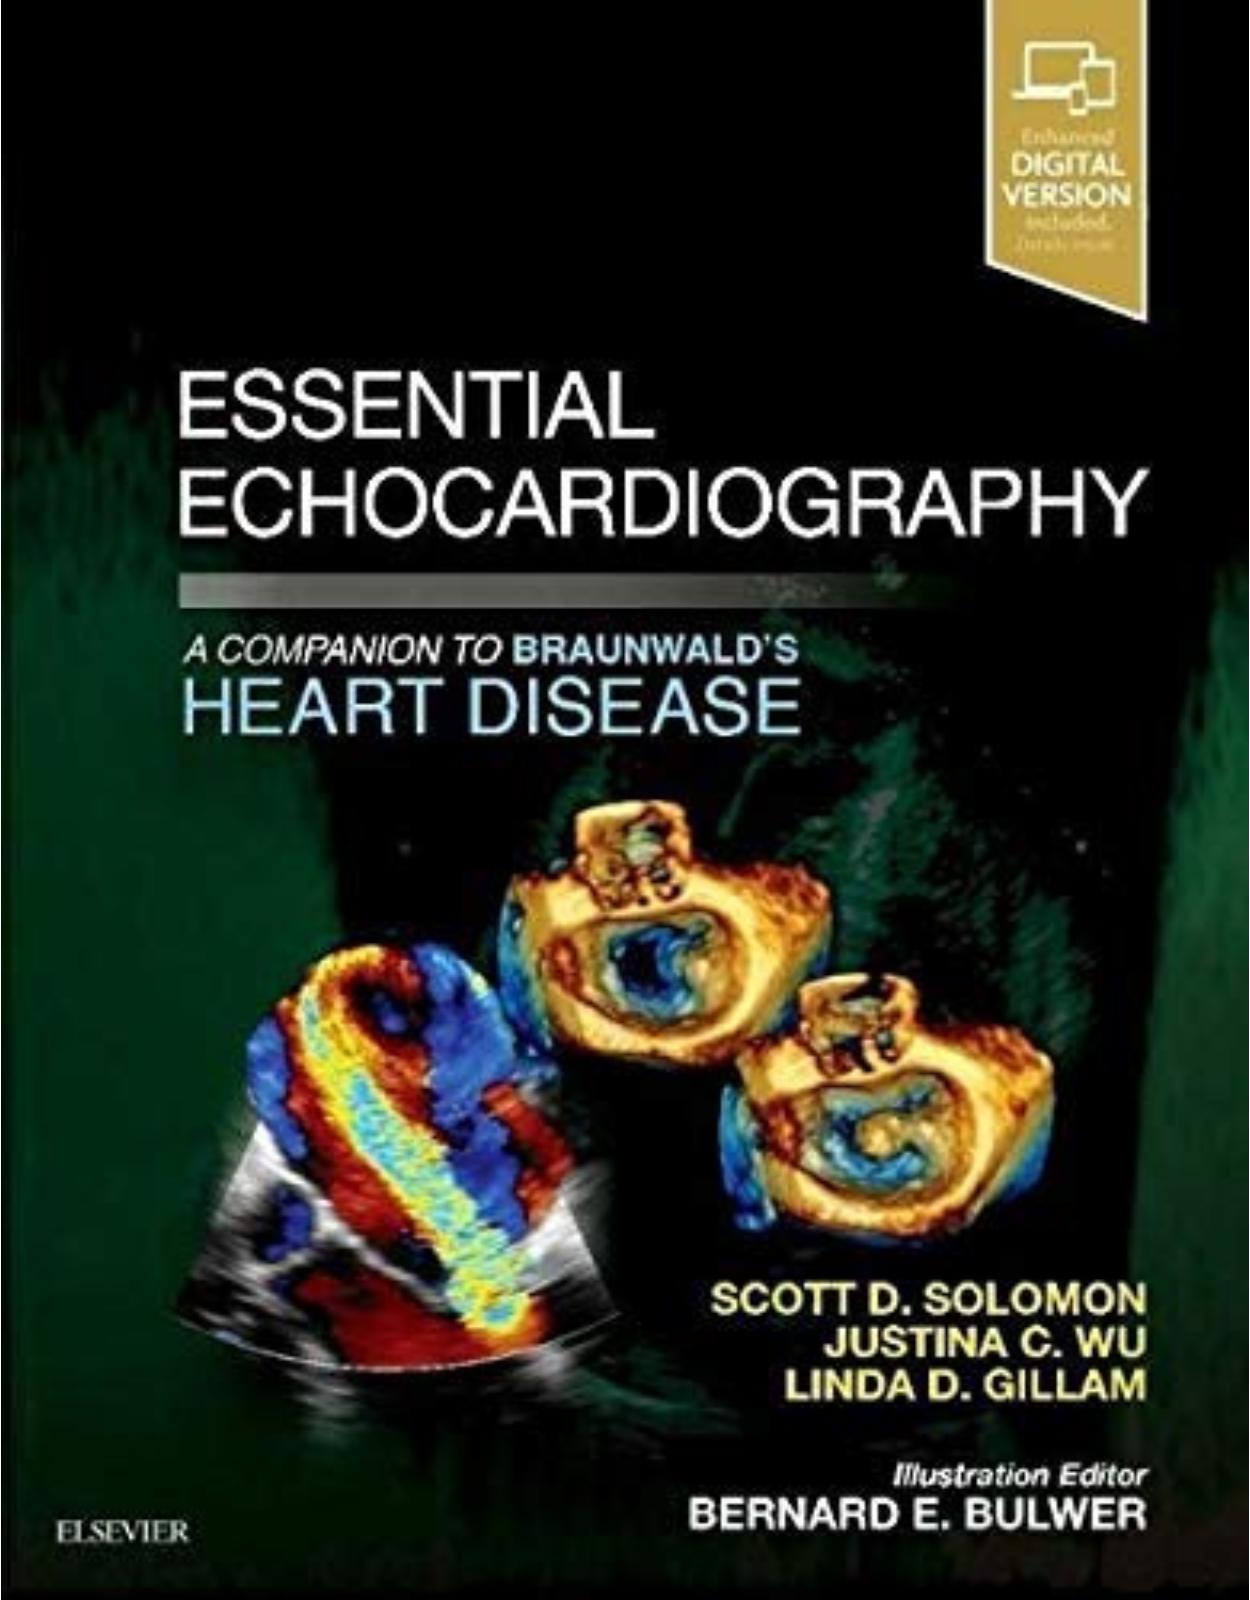 Essential Echocardiography: A Companion to Braunwald’s Heart Disease, 1e 